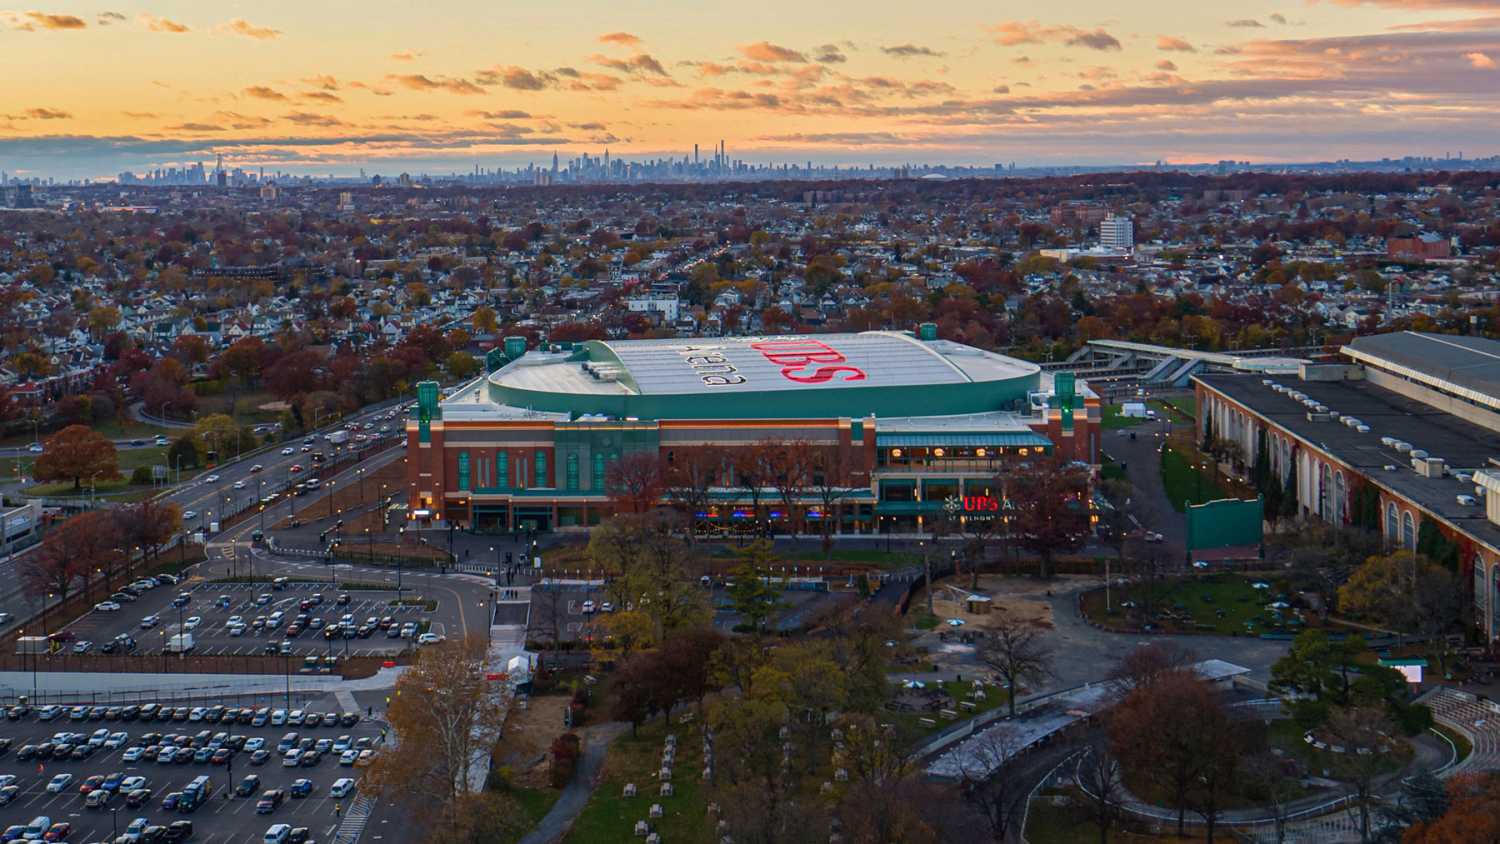 UBS Arena is a multi-purpose indoor arena located in Long Island